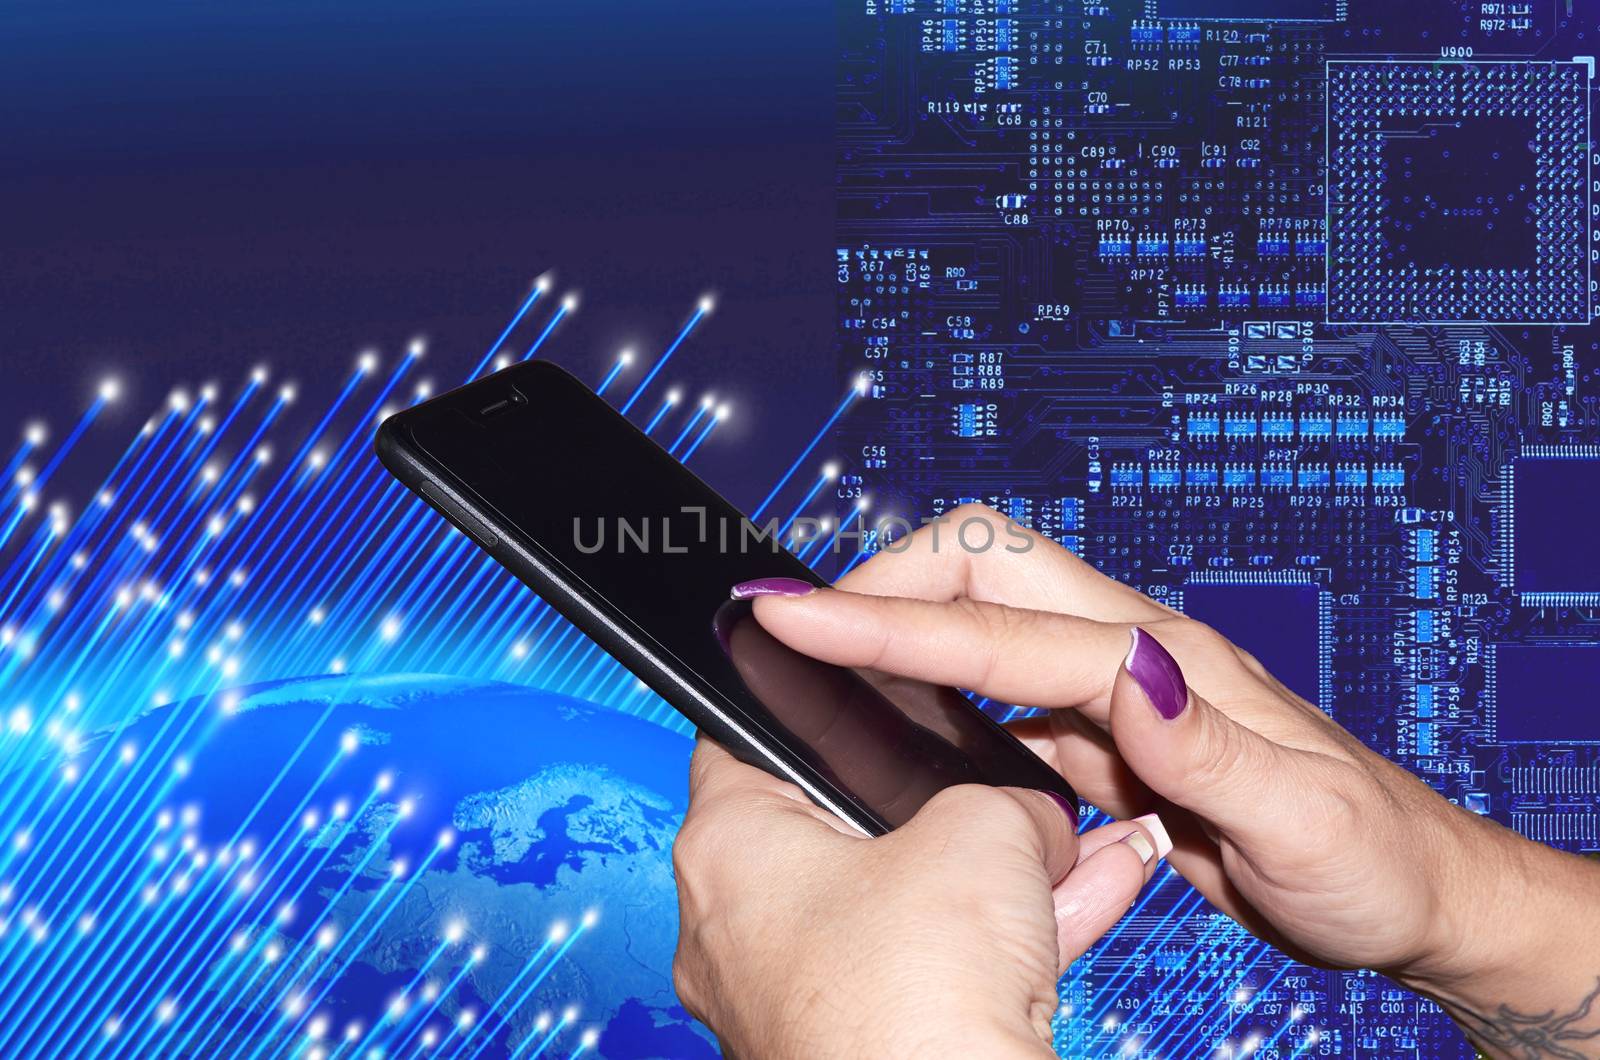 Woman's hands holding a mobile phone world background and circuits